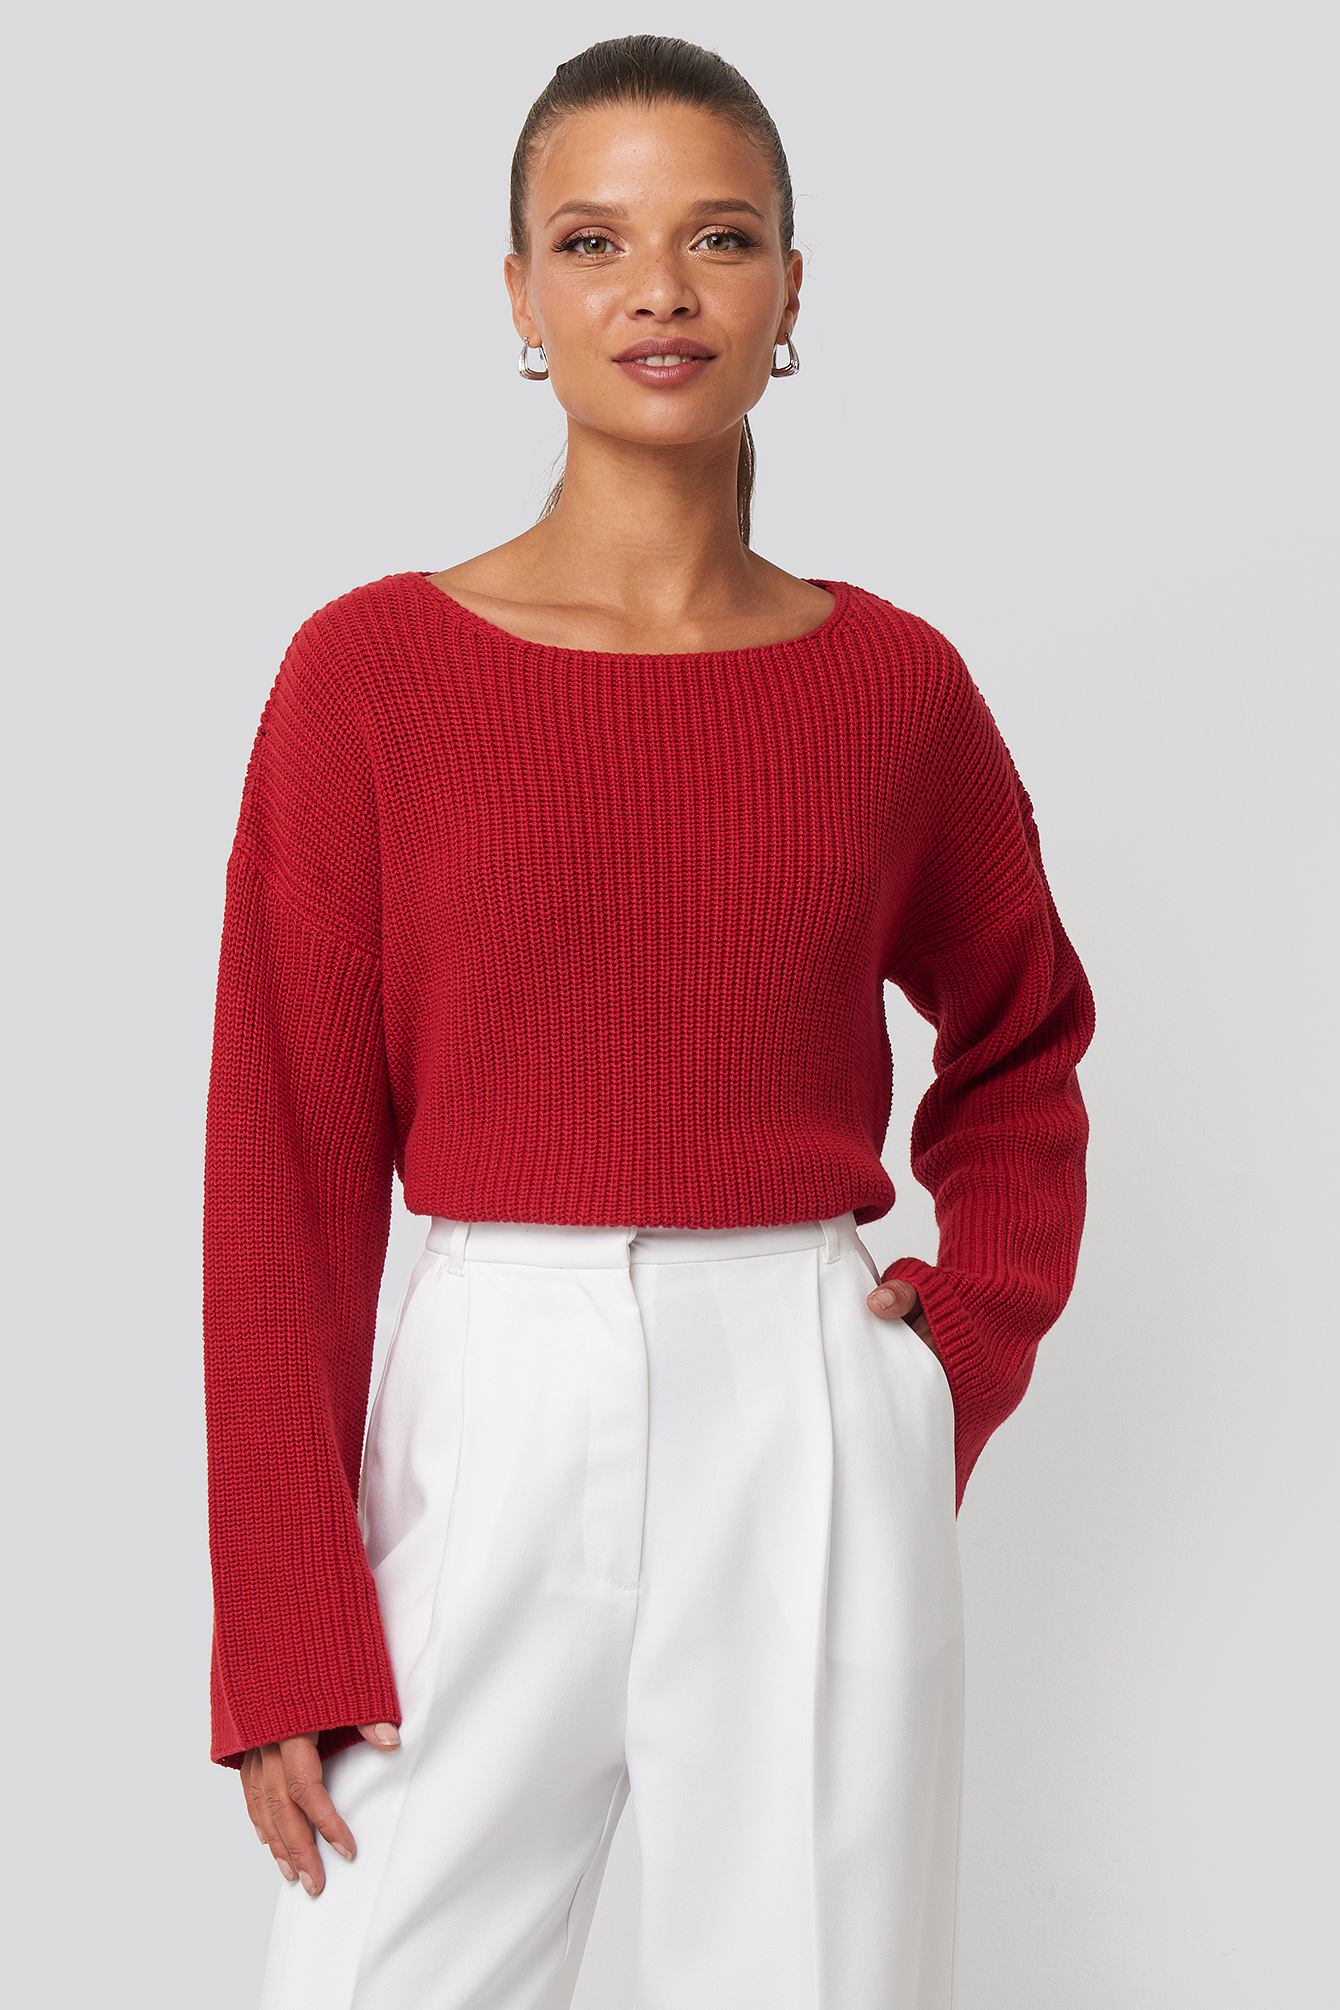 Poppy Red Cropped Long Sleeve Knitted Sweater